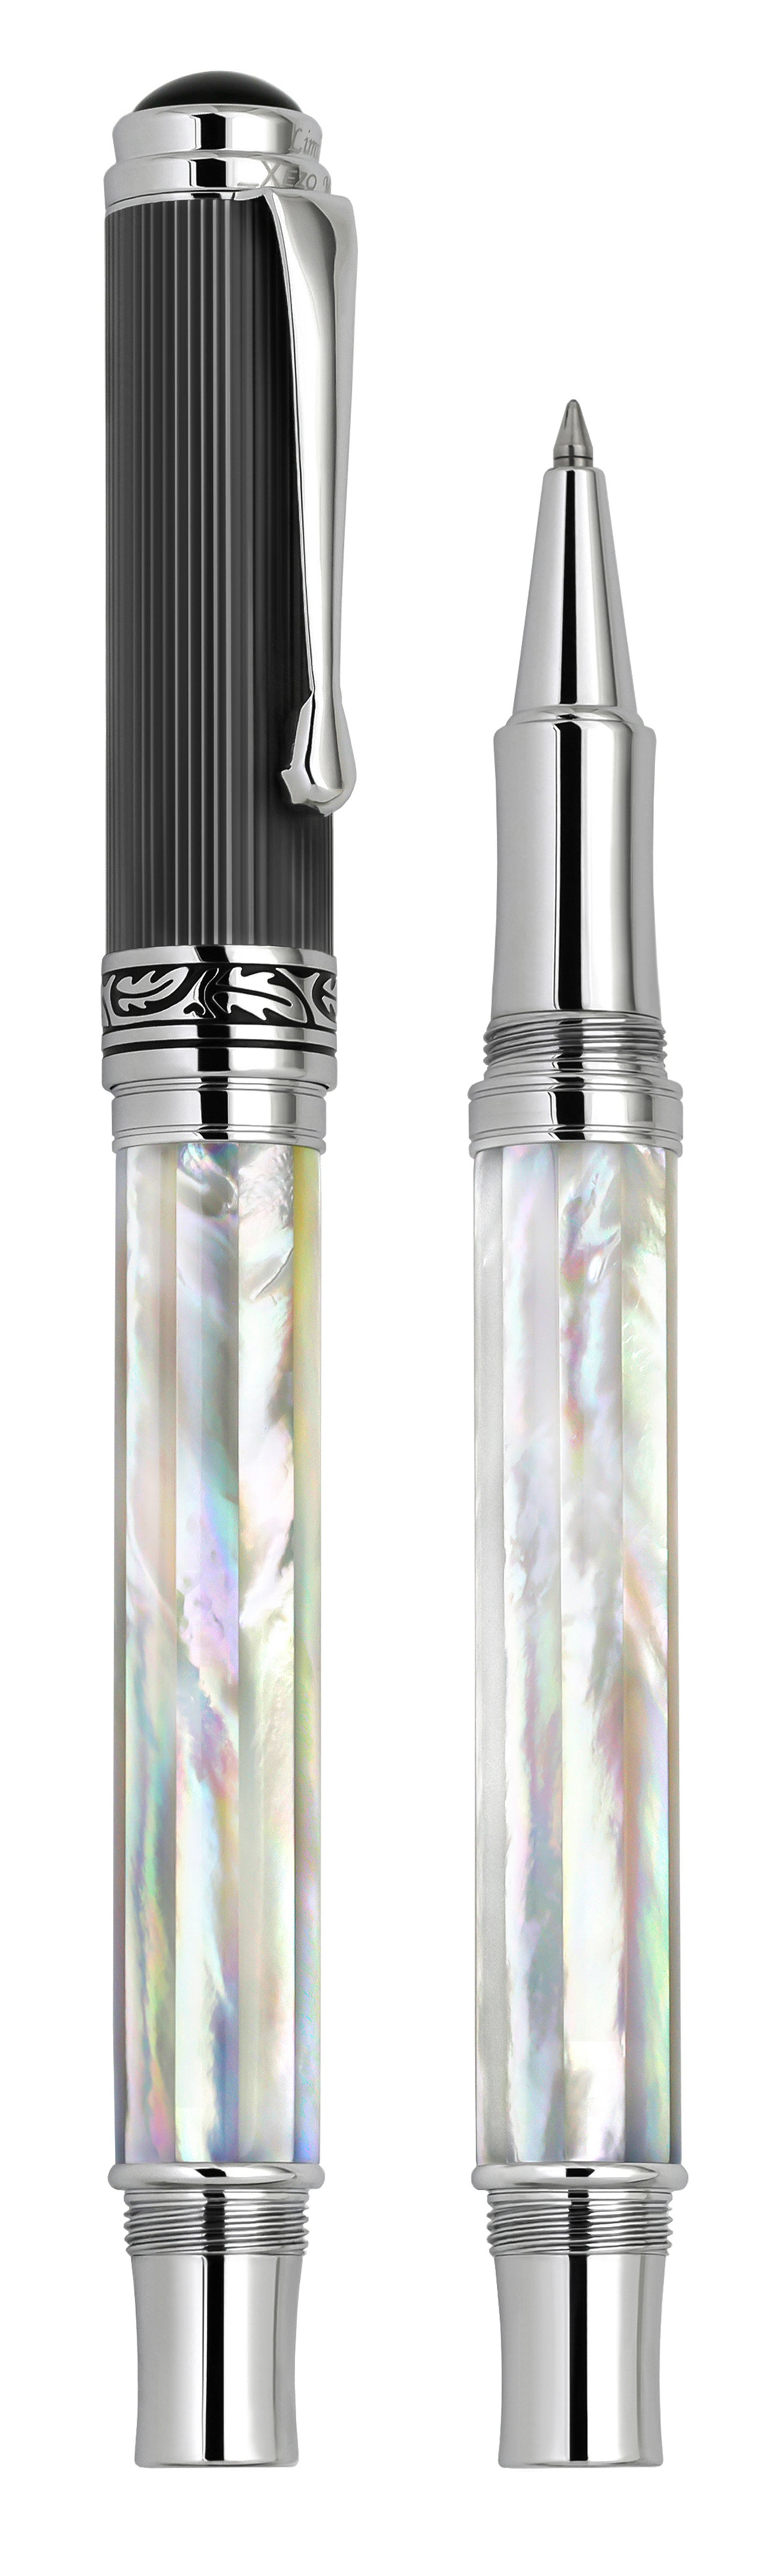 Vertical view of two Maestro White MOP PVD R rollerball pens; the one on the left is capped, and the one on the right is uncapped